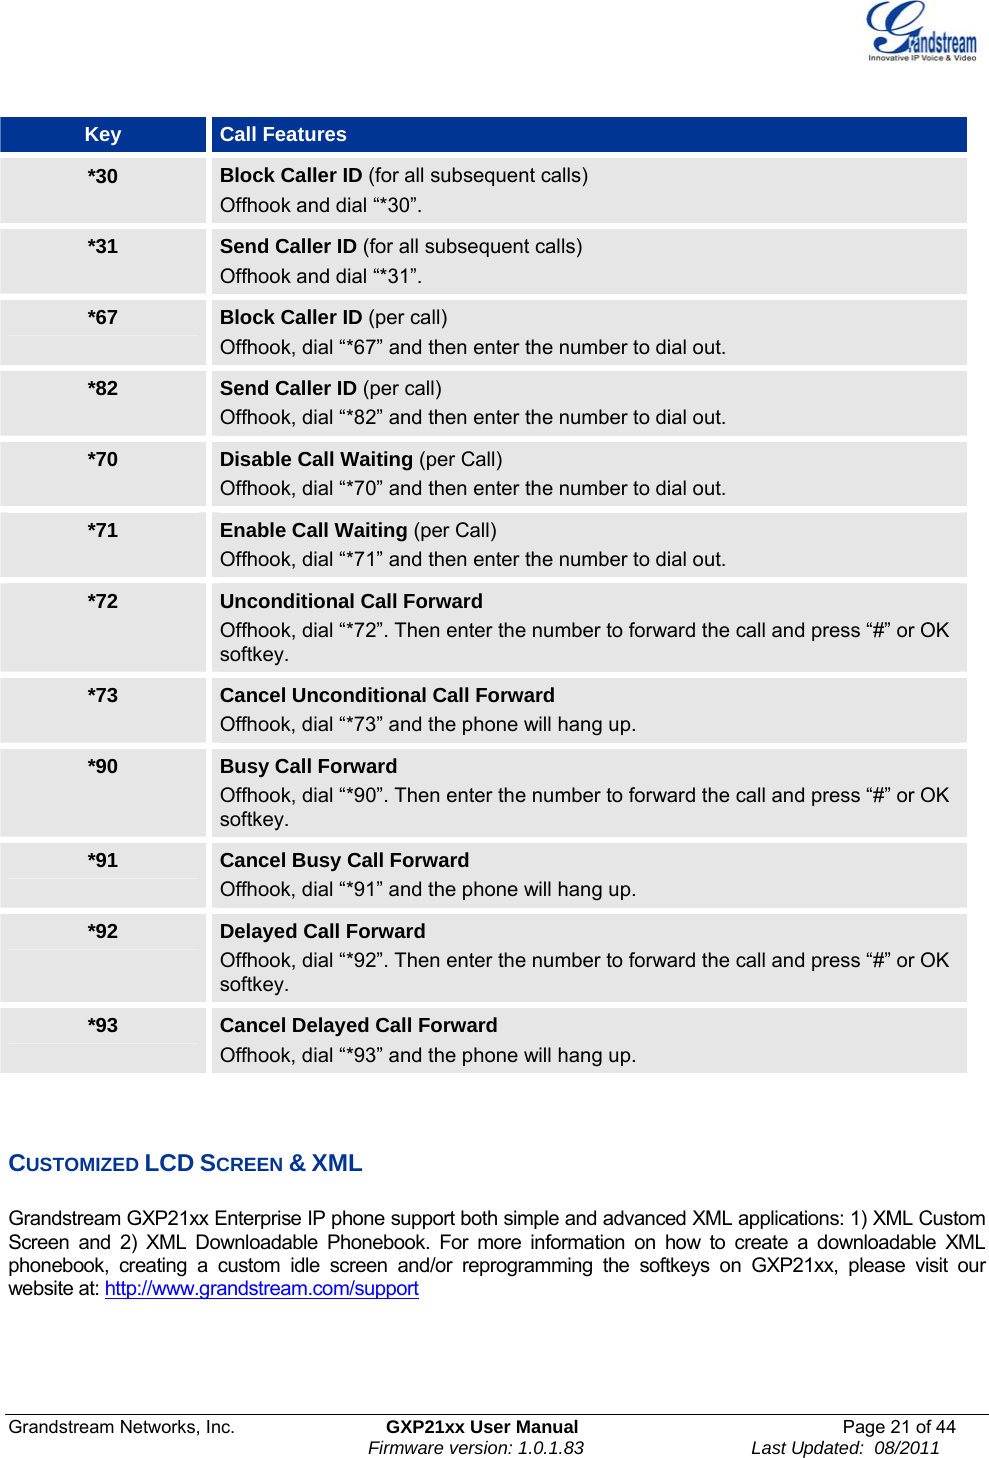  Grandstream Networks, Inc.  GXP21xx User Manual  Page 21 of 44                                                                Firmware version: 1.0.1.83                                 Last Updated:  08/2011  Key  Call Features *30  Block Caller ID (for all subsequent calls) Offhook and dial “*30”. *31  Send Caller ID (for all subsequent calls) Offhook and dial “*31”. *67  Block Caller ID (per call) Offhook, dial “*67” and then enter the number to dial out. *82  Send Caller ID (per call) Offhook, dial “*82” and then enter the number to dial out. *70  Disable Call Waiting (per Call) Offhook, dial “*70” and then enter the number to dial out. *71  Enable Call Waiting (per Call) Offhook, dial “*71” and then enter the number to dial out. *72  Unconditional Call Forward  Offhook, dial “*72”. Then enter the number to forward the call and press “#” or OK softkey. *73  Cancel Unconditional Call Forward Offhook, dial “*73” and the phone will hang up. *90  Busy Call Forward Offhook, dial “*90”. Then enter the number to forward the call and press “#” or OK softkey. *91  Cancel Busy Call Forward Offhook, dial “*91” and the phone will hang up. *92  Delayed Call Forward Offhook, dial “*92”. Then enter the number to forward the call and press “#” or OK softkey. *93  Cancel Delayed Call Forward Offhook, dial “*93” and the phone will hang up.    CUSTOMIZED LCD SCREEN &amp; XML  Grandstream GXP21xx Enterprise IP phone support both simple and advanced XML applications: 1) XML Custom Screen and 2) XML Downloadable Phonebook. For more information on how to create a downloadable XML phonebook, creating a custom idle screen and/or reprogramming the softkeys on GXP21xx, please visit our website at: http://www.grandstream.com/support   